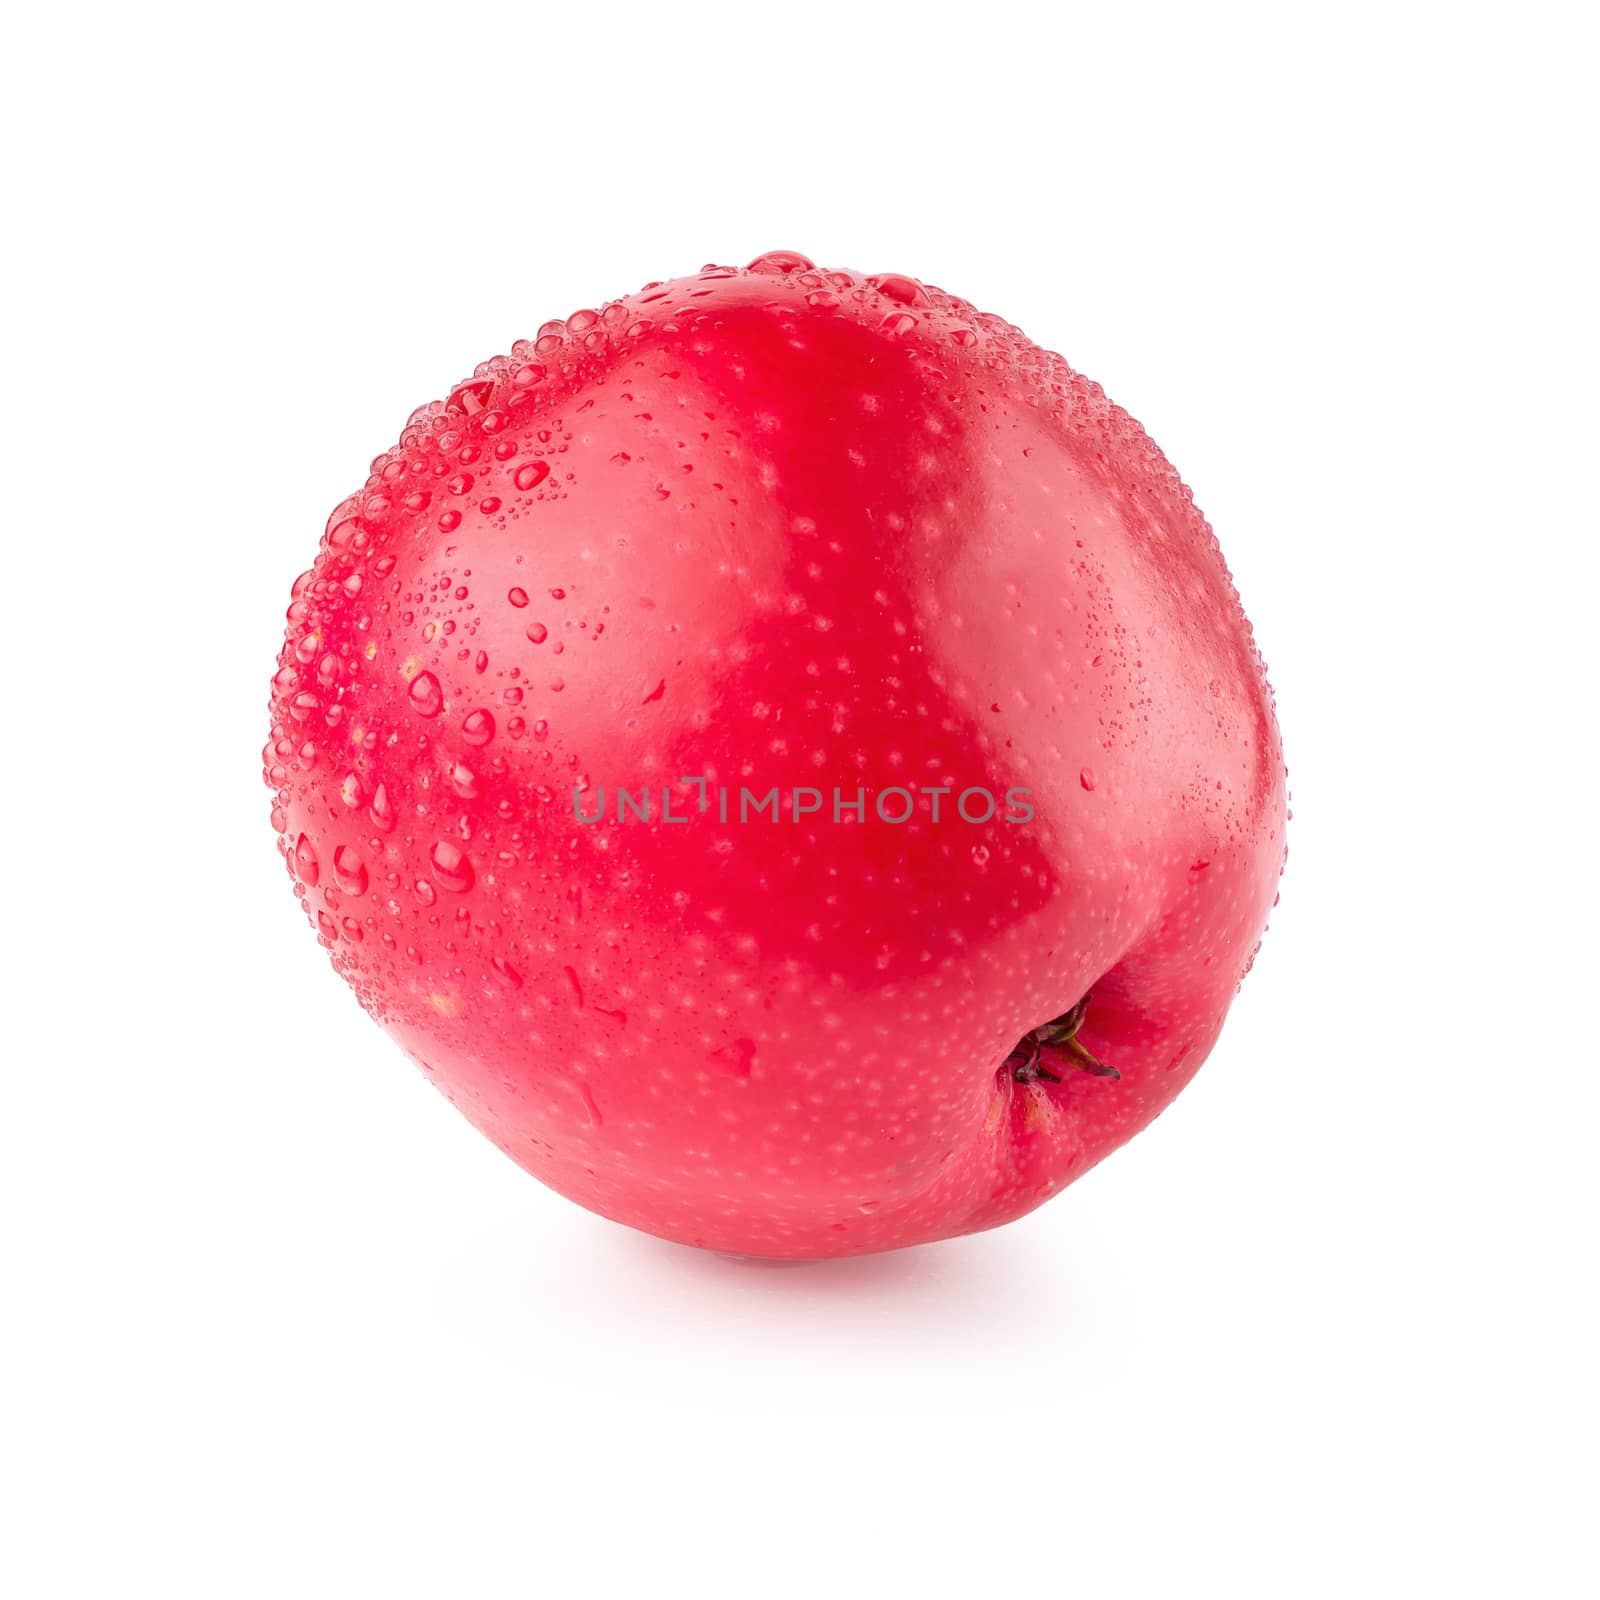 Red apple whole pieces isolated on white background by kaiskynet